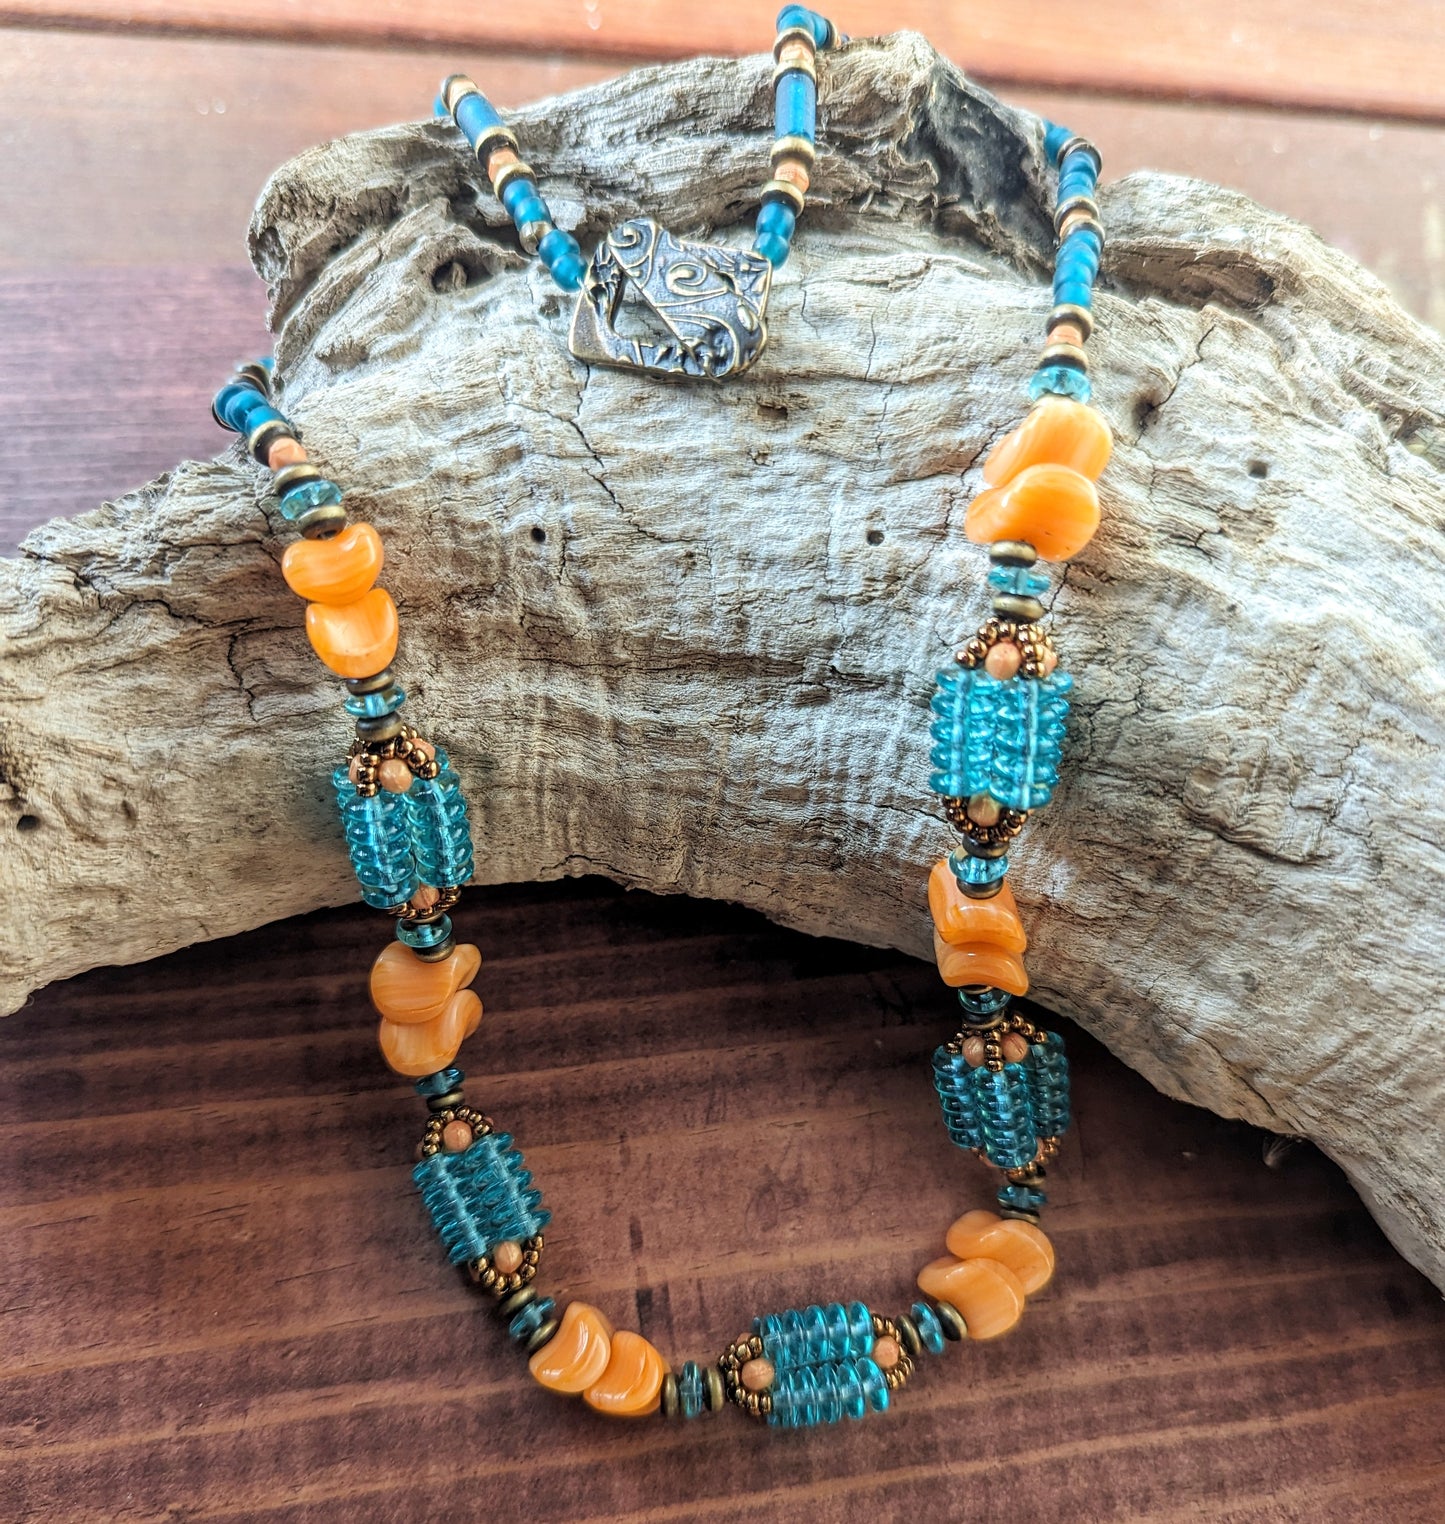 A light orange and transparent teal necklace draped across a curved gray piece of driftwood. The necklace has orange beads shaped like waves and teal beaded beads that are made up of four columns of teal discs.